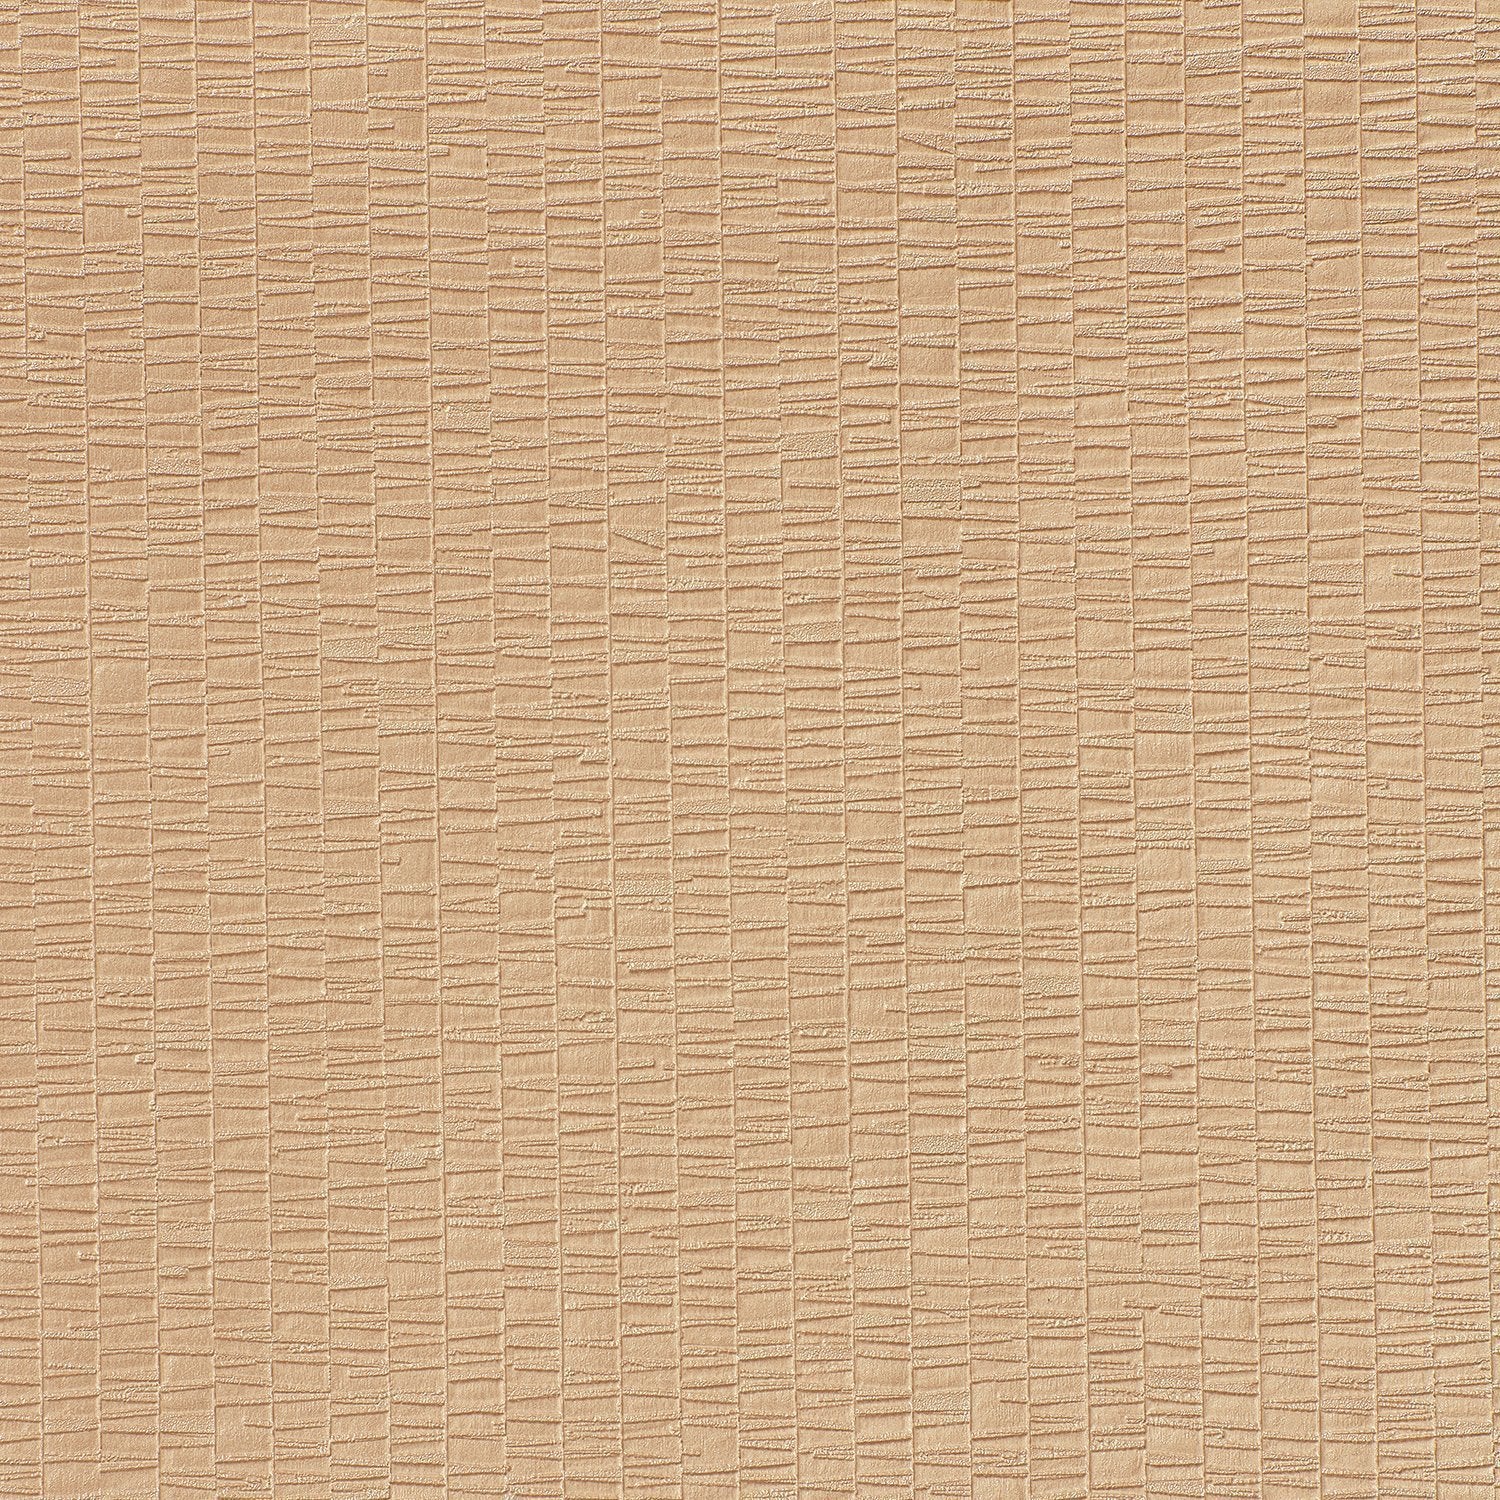 Stagger - Y47767 Peach Quartz - Wallcovering - Vycon - Kube Contract